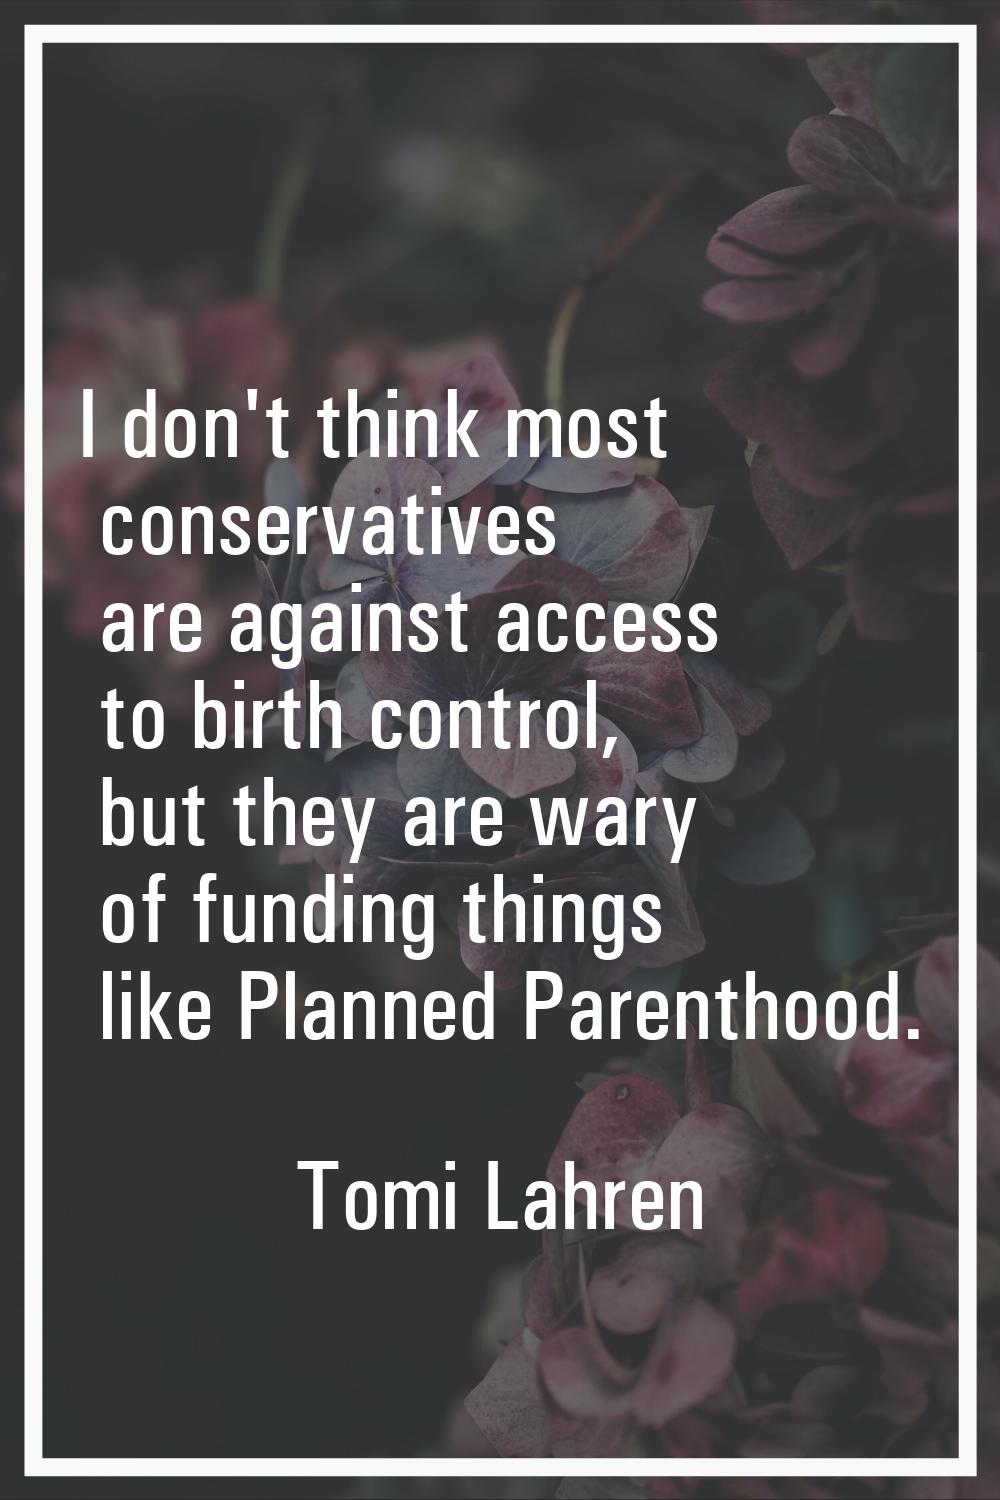 I don't think most conservatives are against access to birth control, but they are wary of funding 